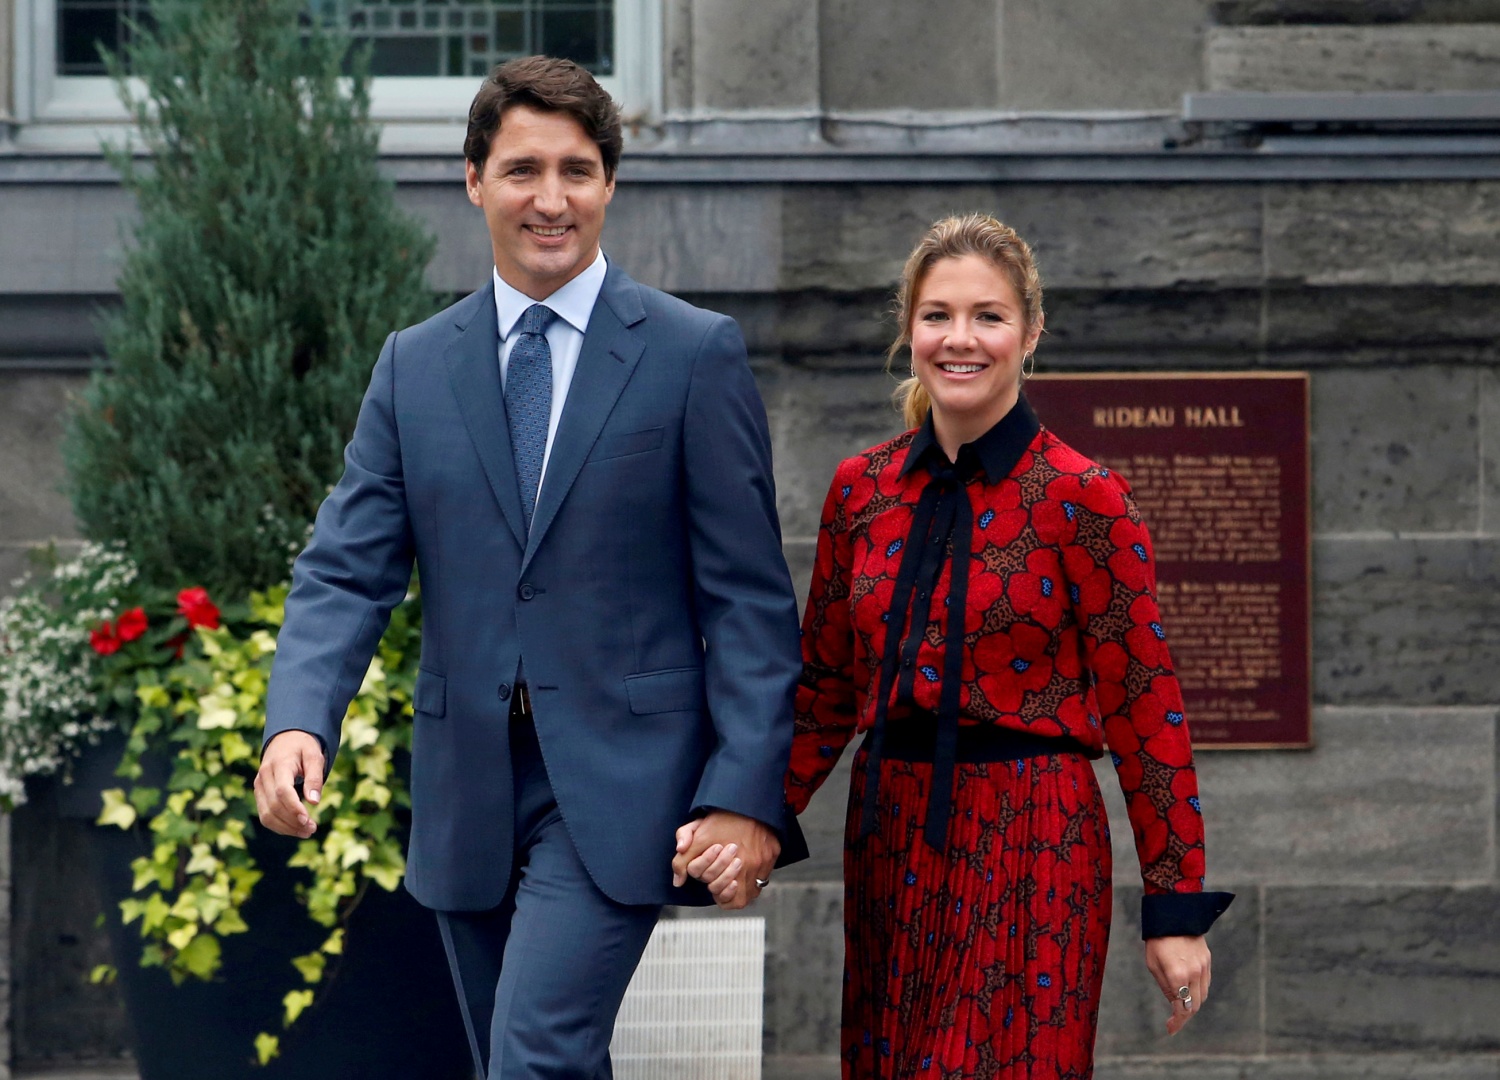 [BREAKING] Coronavirus Positive: Sophie Trudeau, Wife of Canada's PM Justin Trudeau Tests Positive